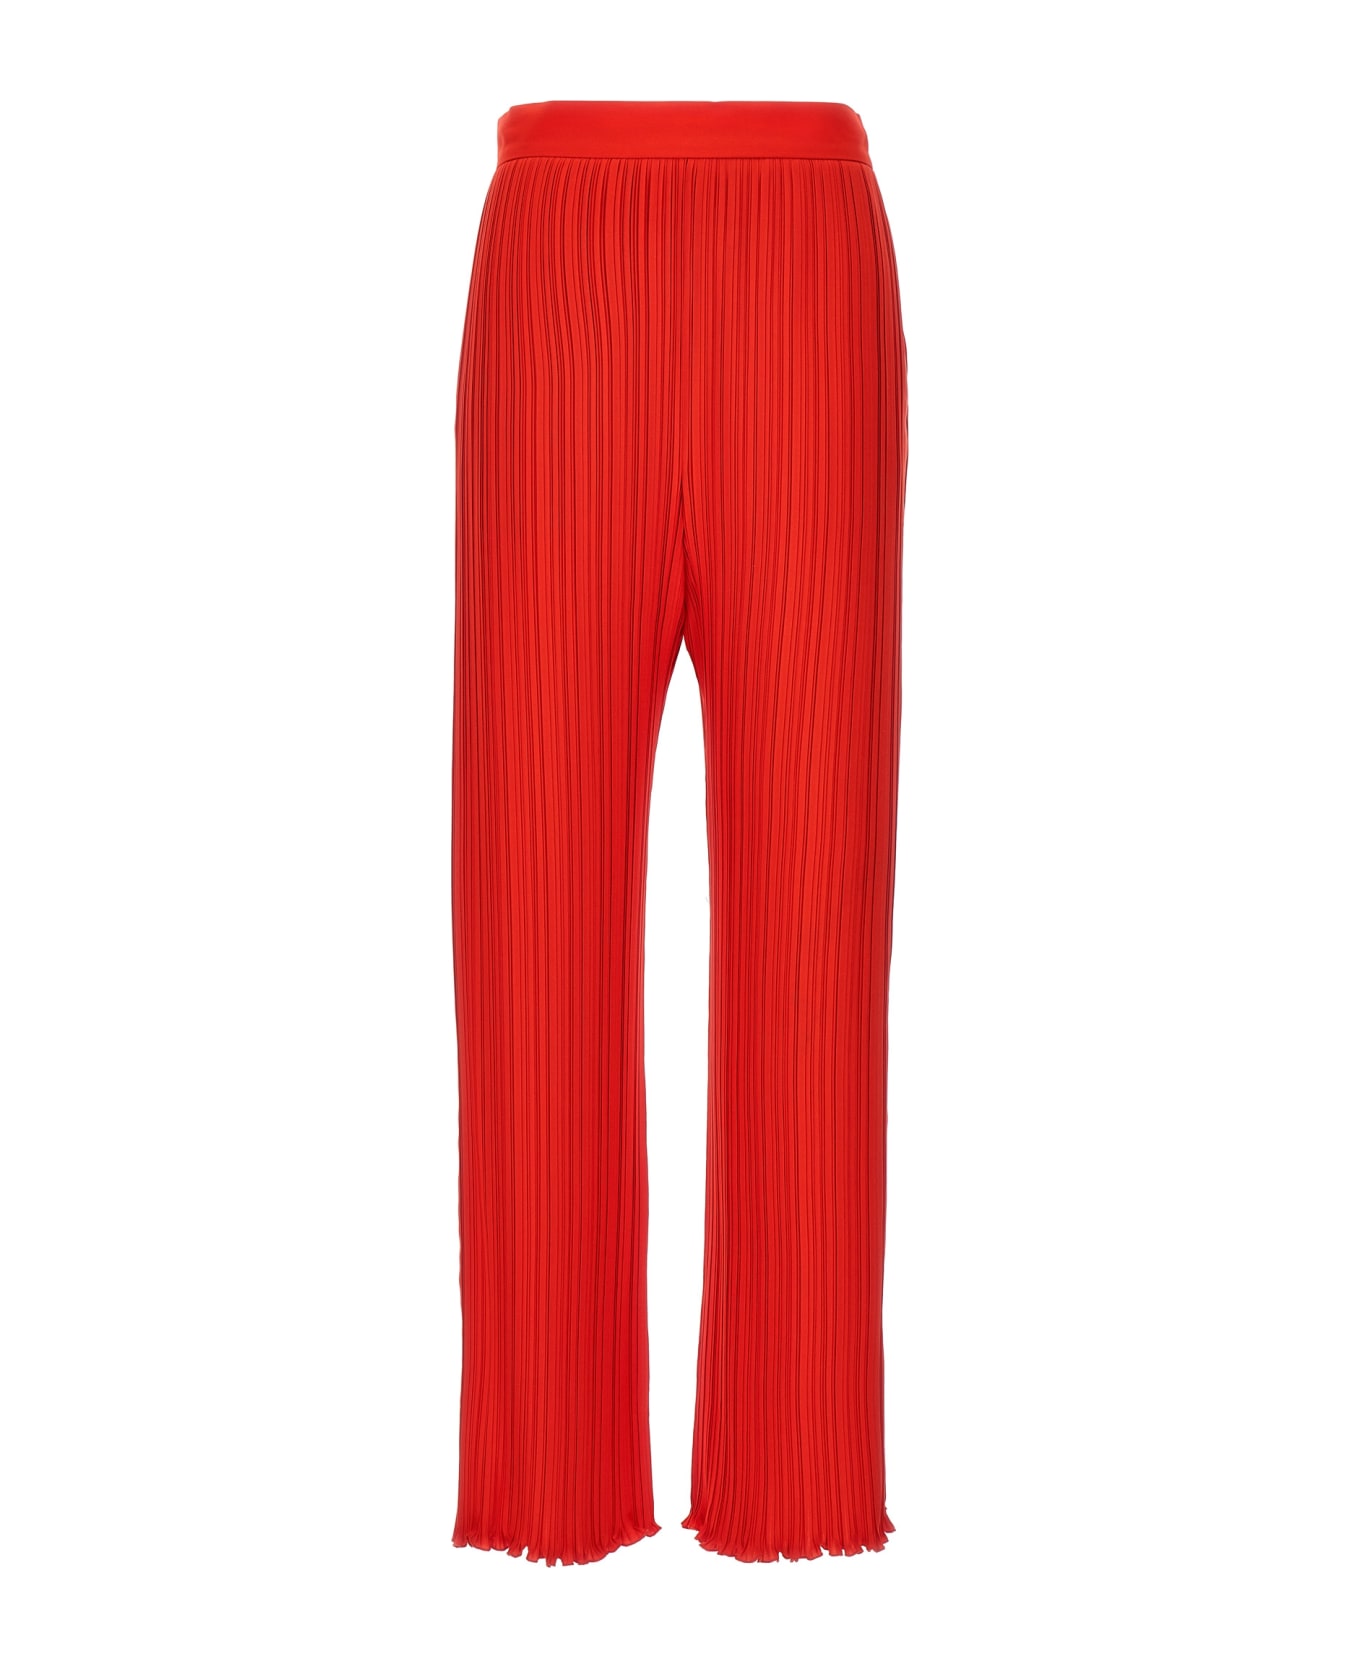 Lanvin Pleated Pants - Red ボトムス